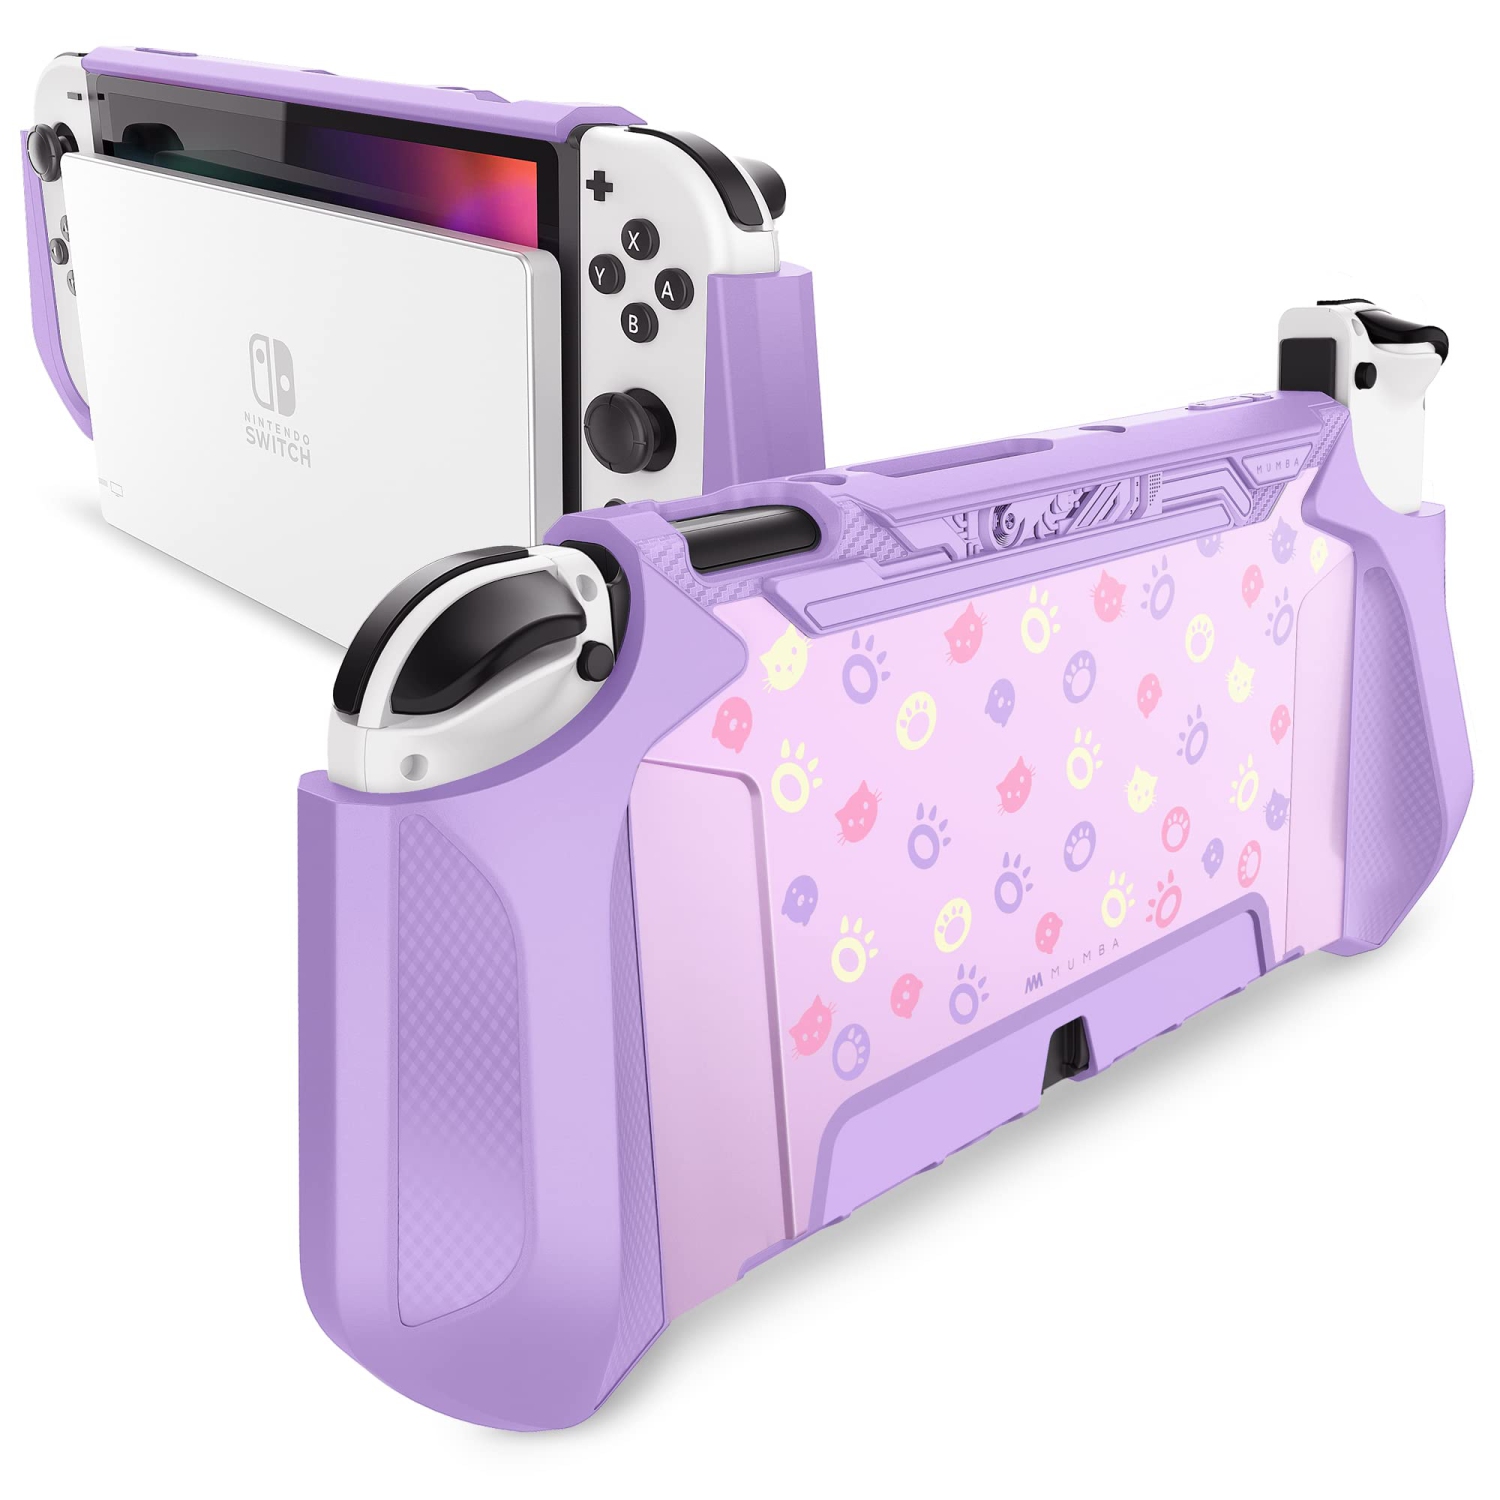 Nintendo Switch OLED 2021 Dockable Case - TPU Grip Protective Cover for 7 Inch OLED Screen and Joy-Con Controller - BBPurple